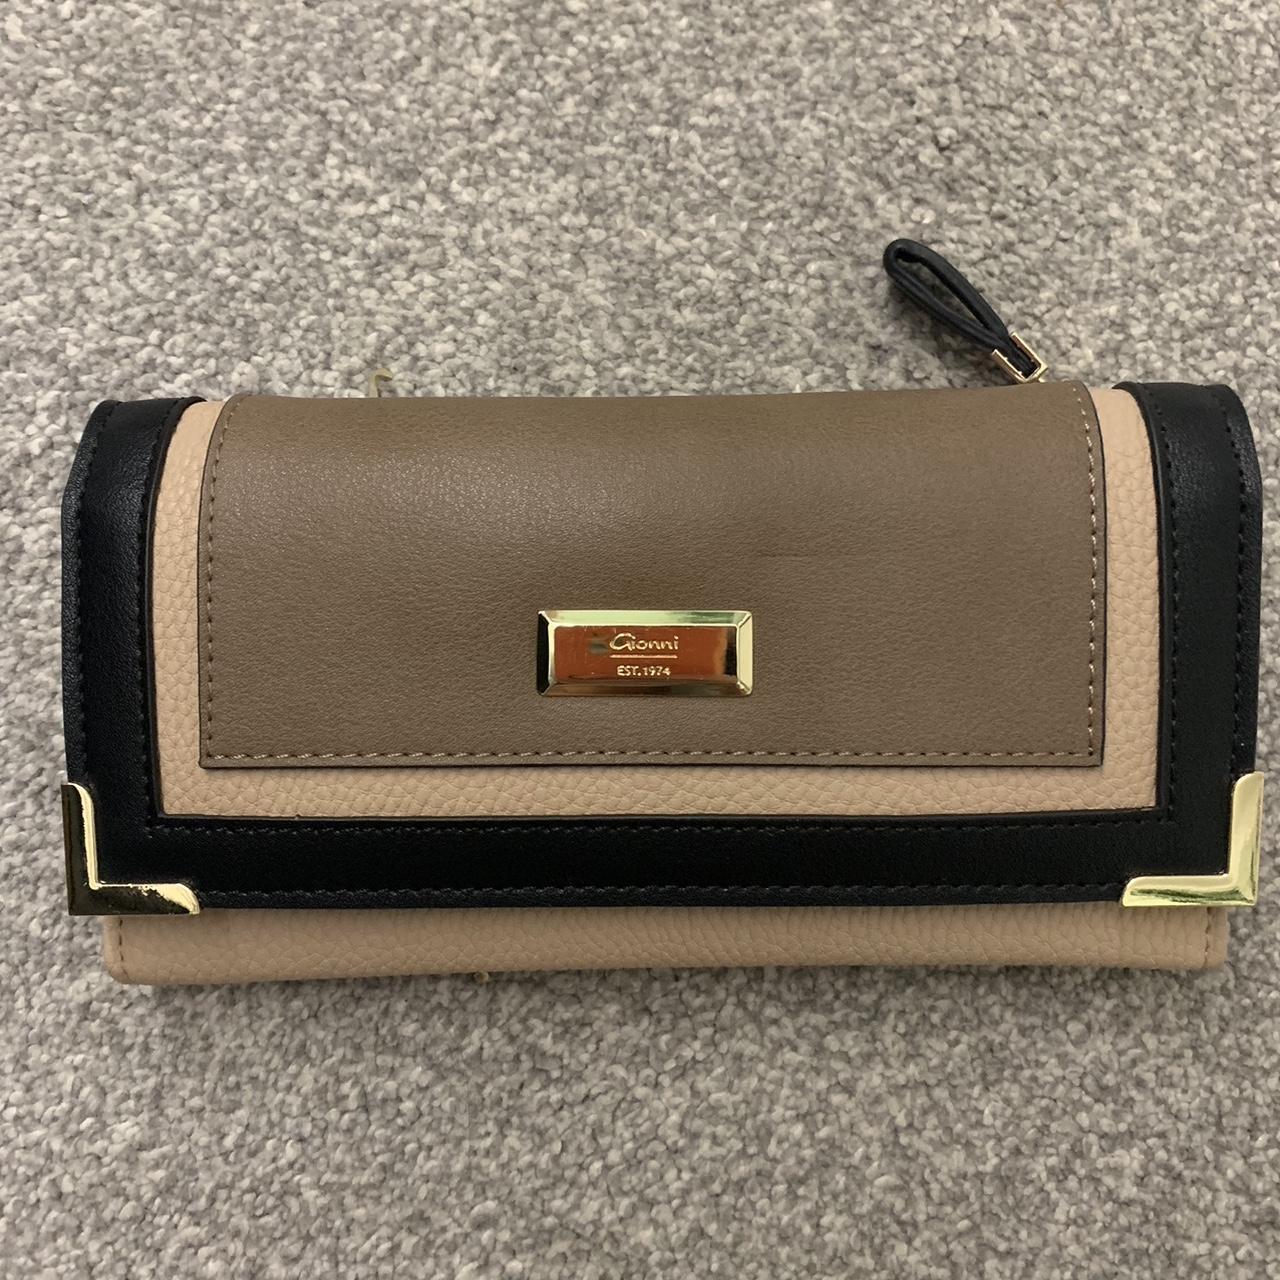 Gionni purse never been used in good condition - Depop